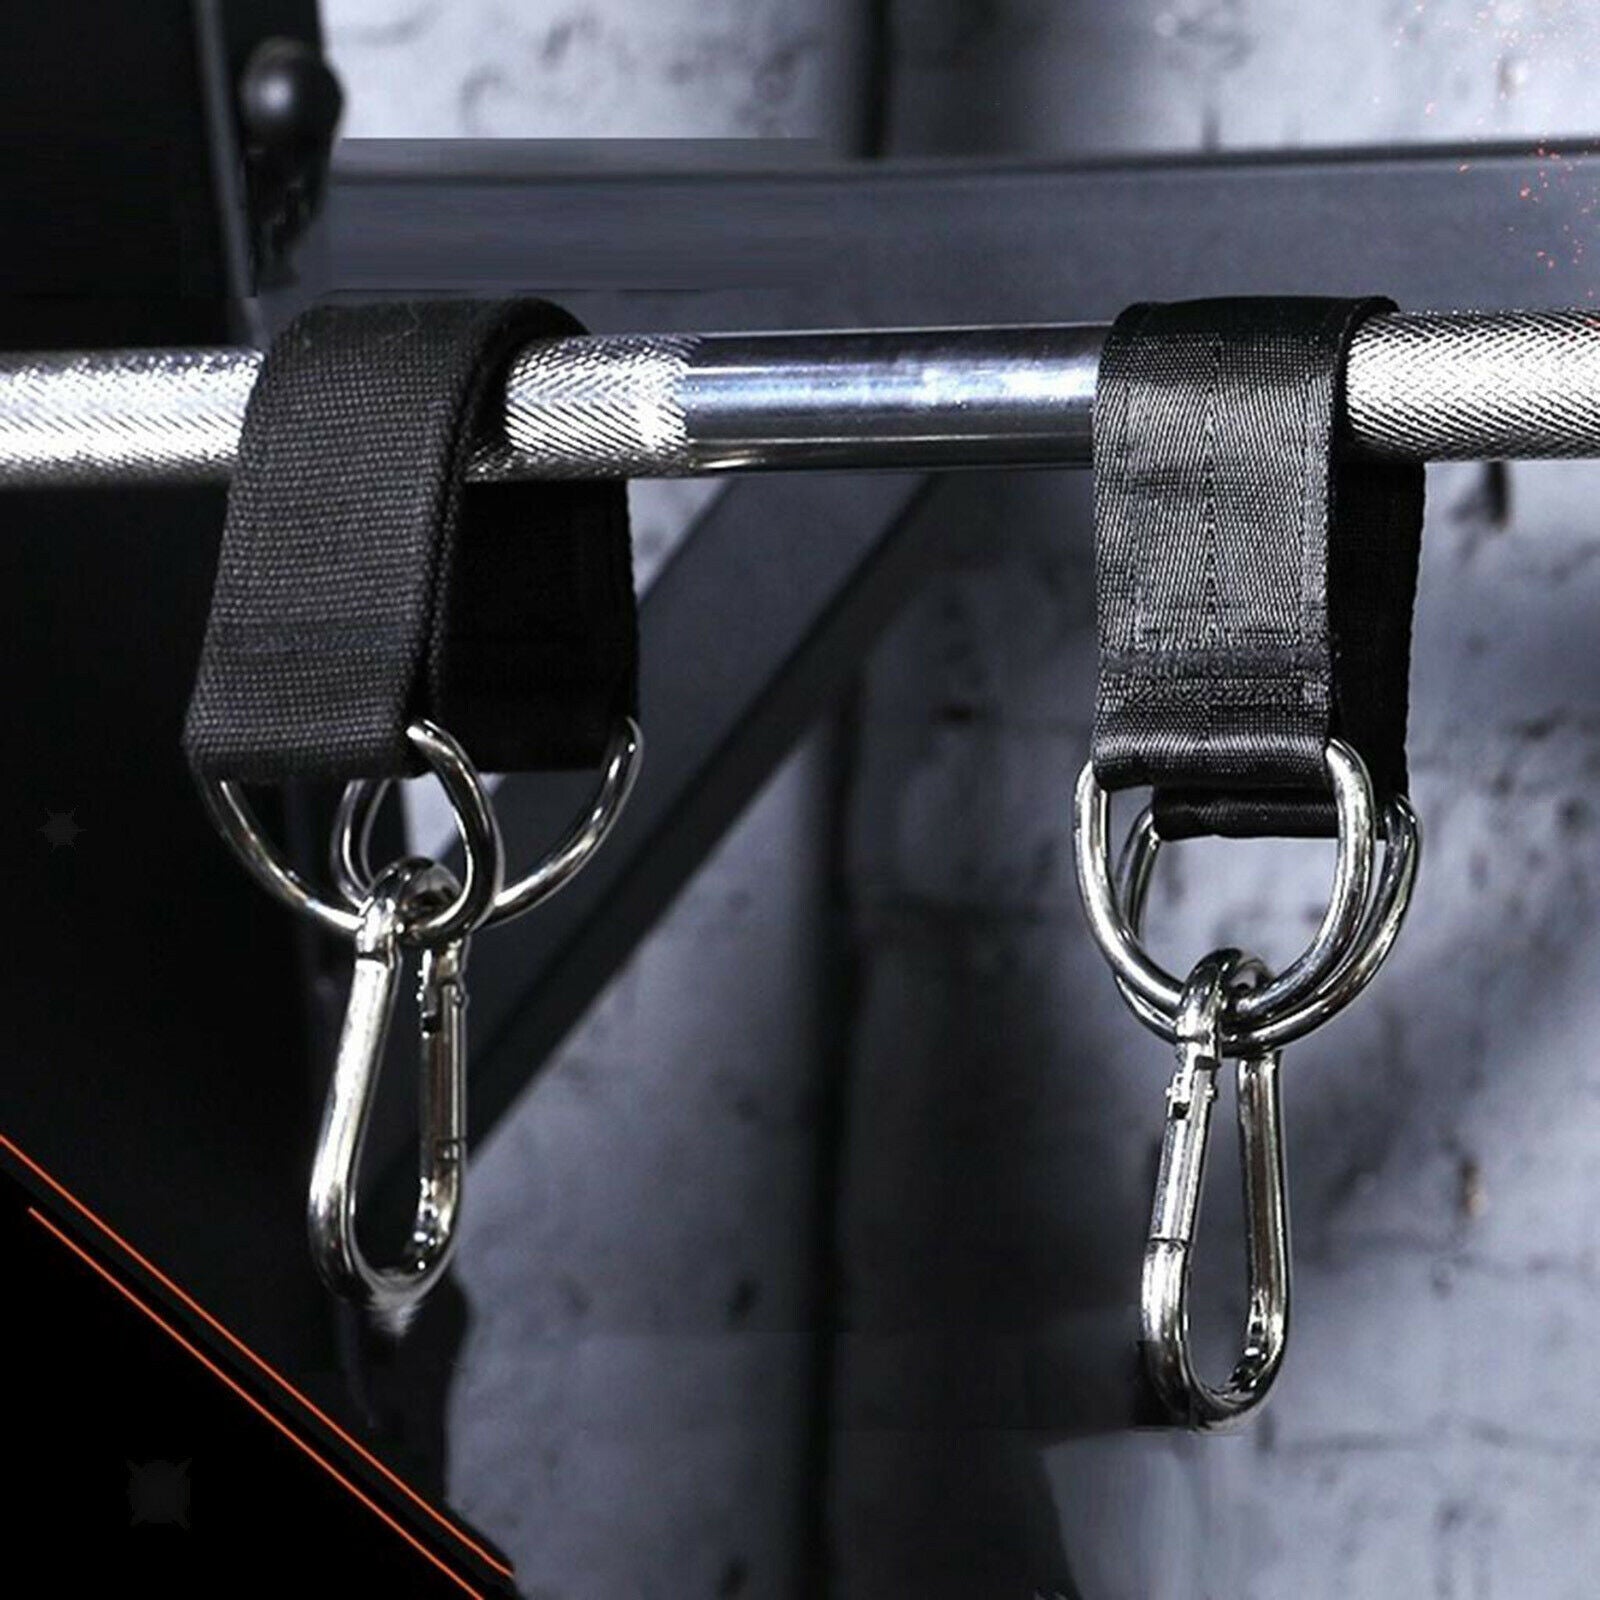 150 Kg Hanging Straps Kit for Swings Gym Hanging Straps with D- Hooks